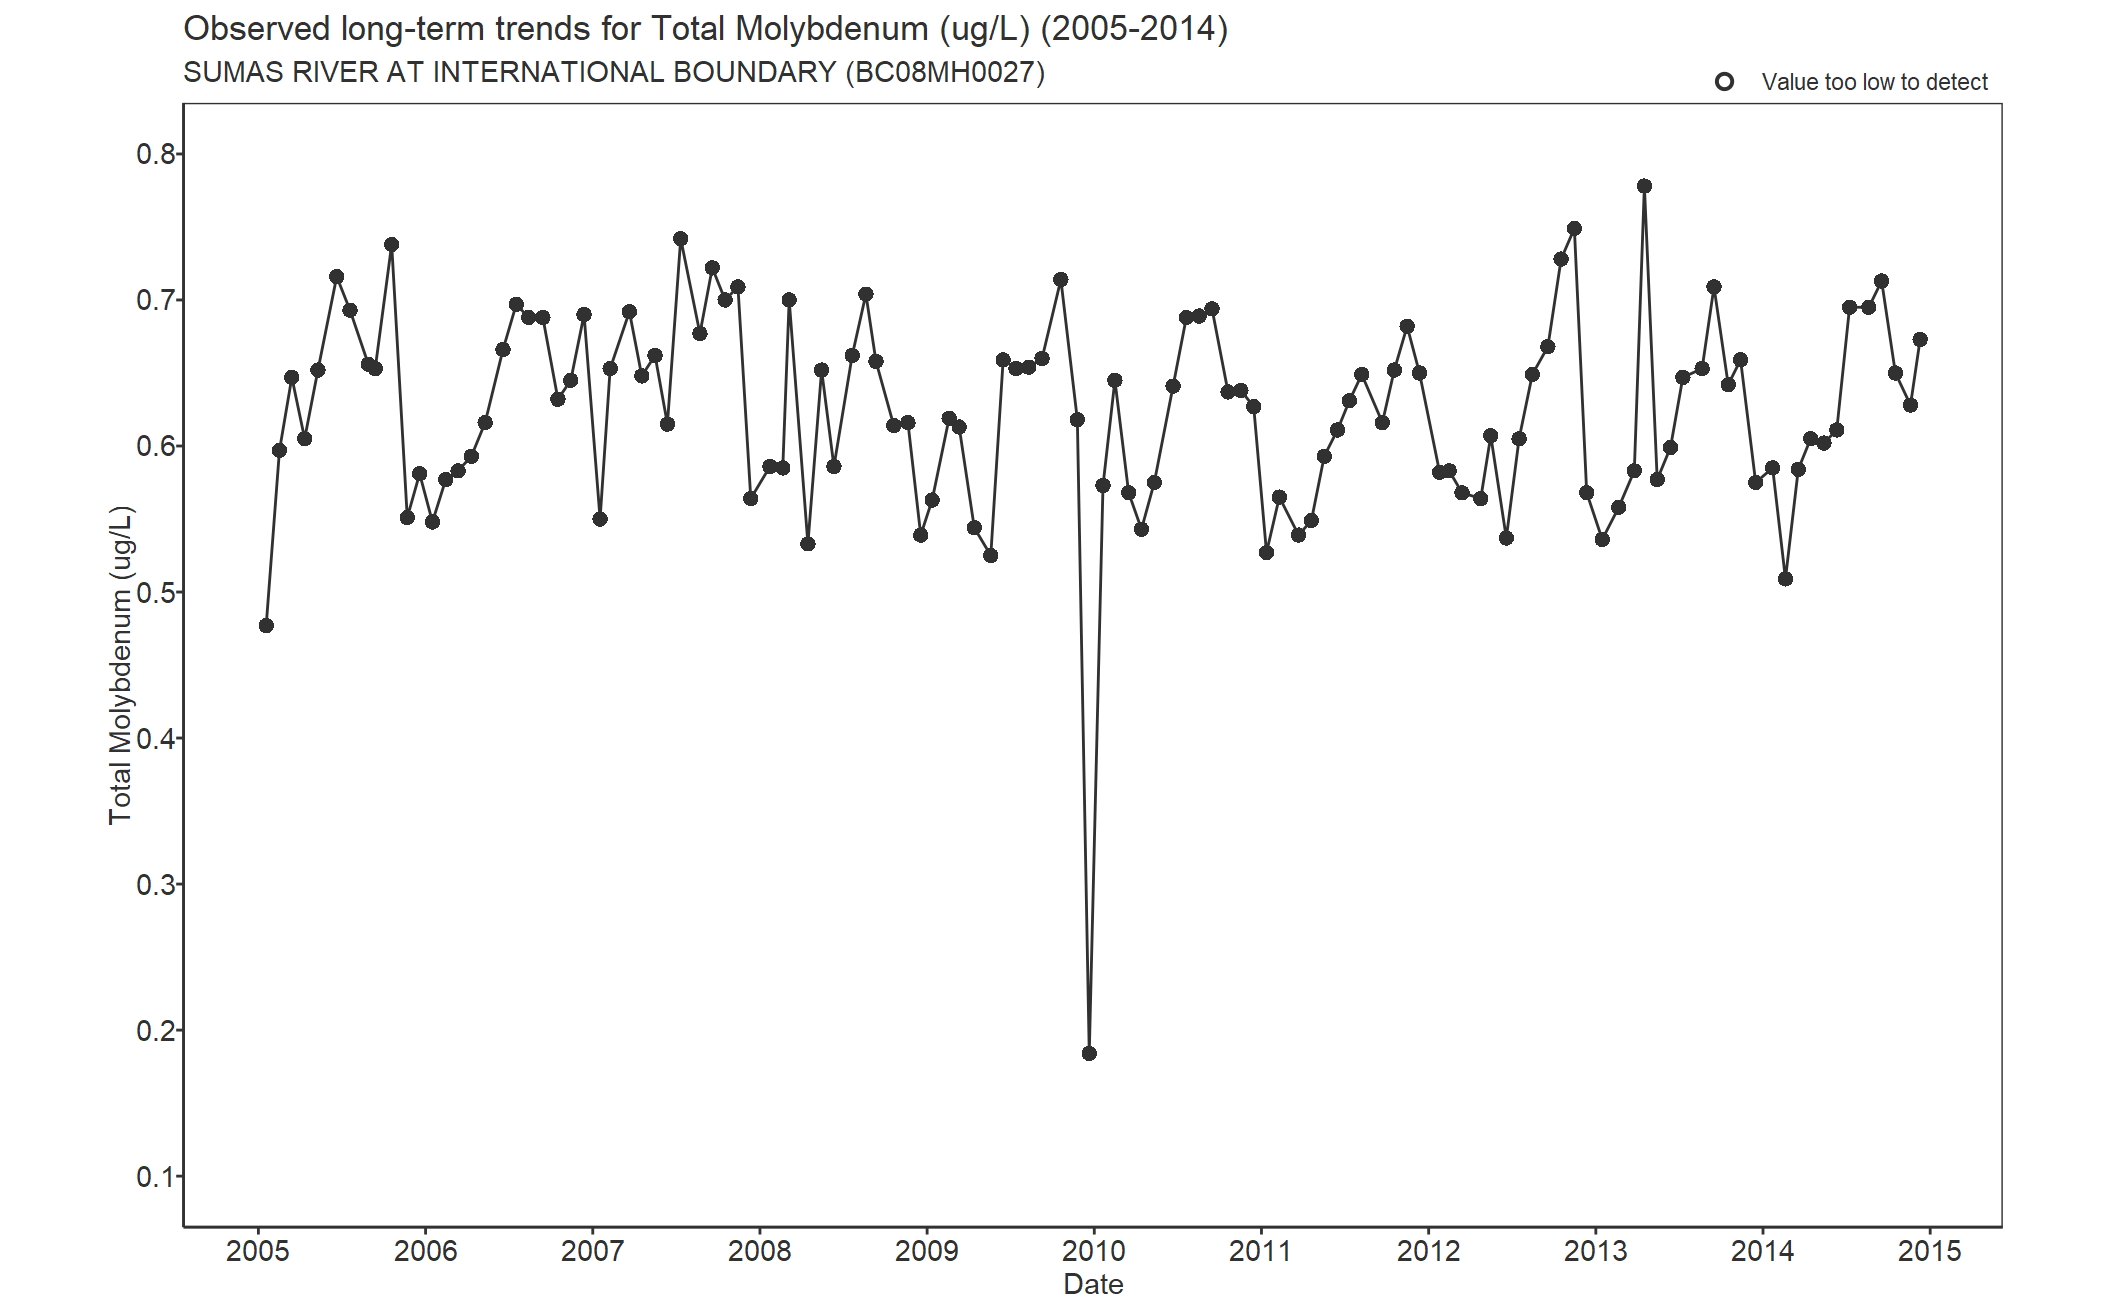 Observed long-term trends for Molybdenum Total (2005-2014)